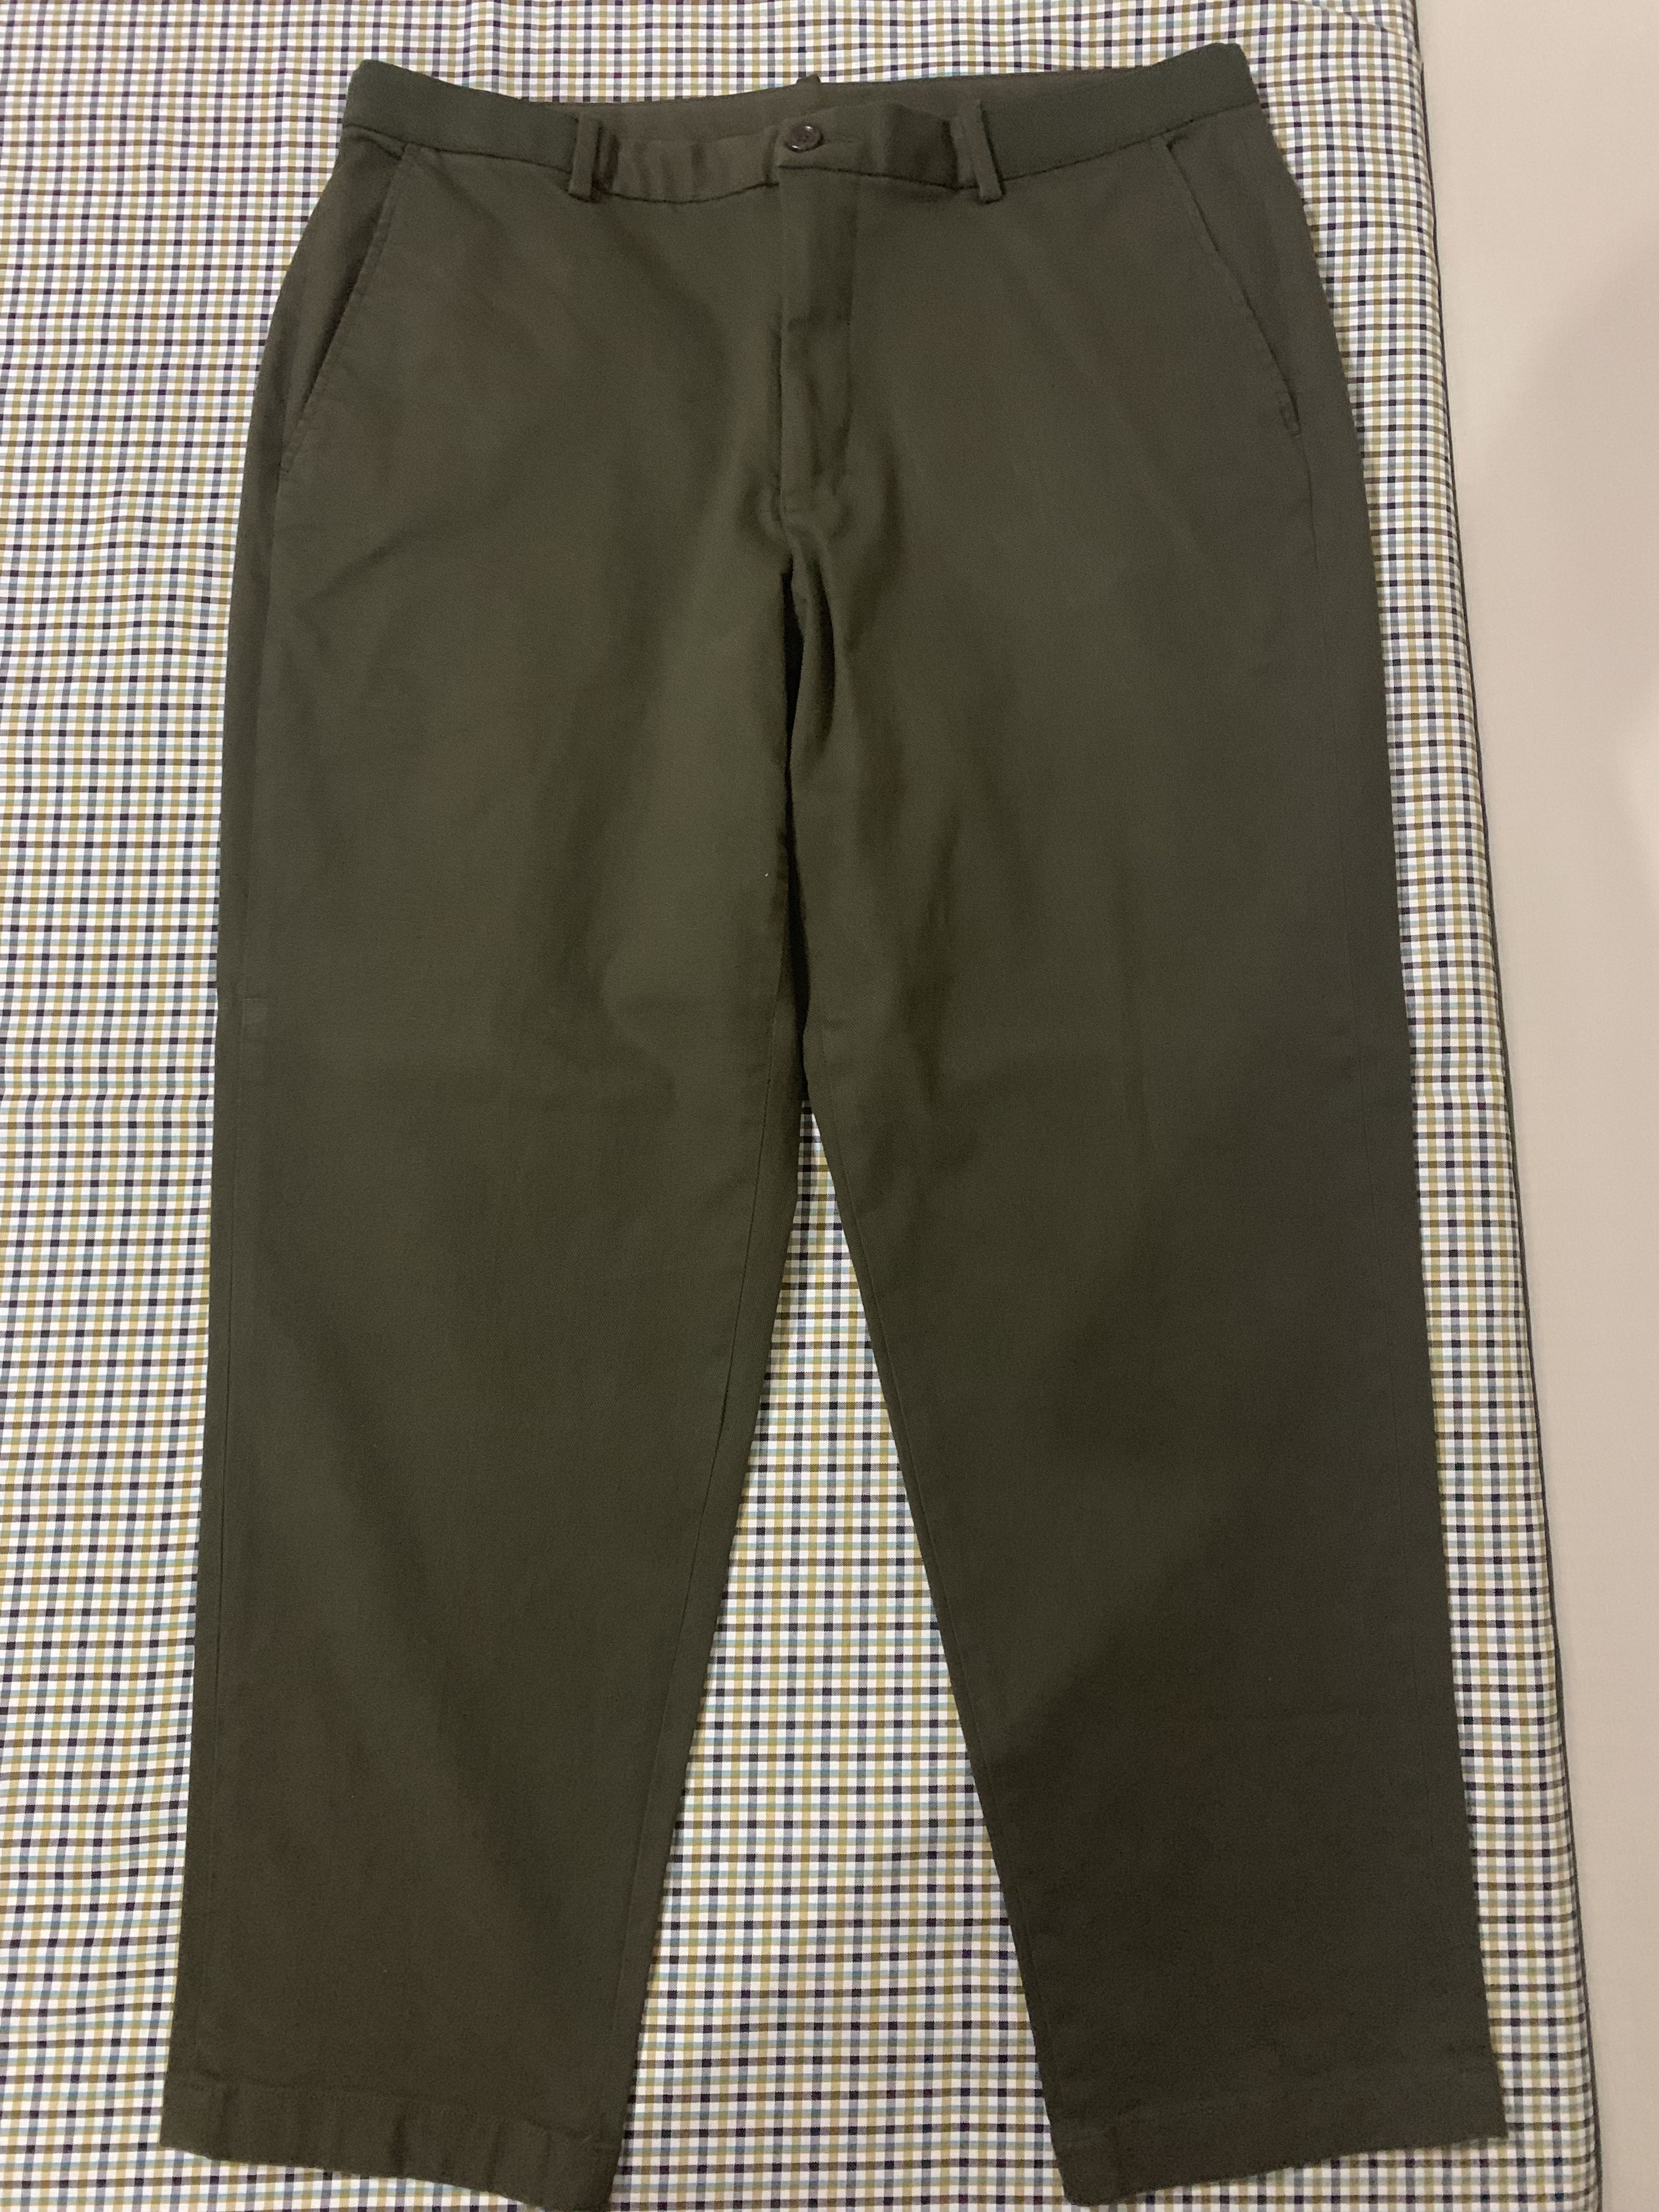 Uniqlo EZY Relaxed fit ankle pants olive green, Men's Fashion, Bottoms ...